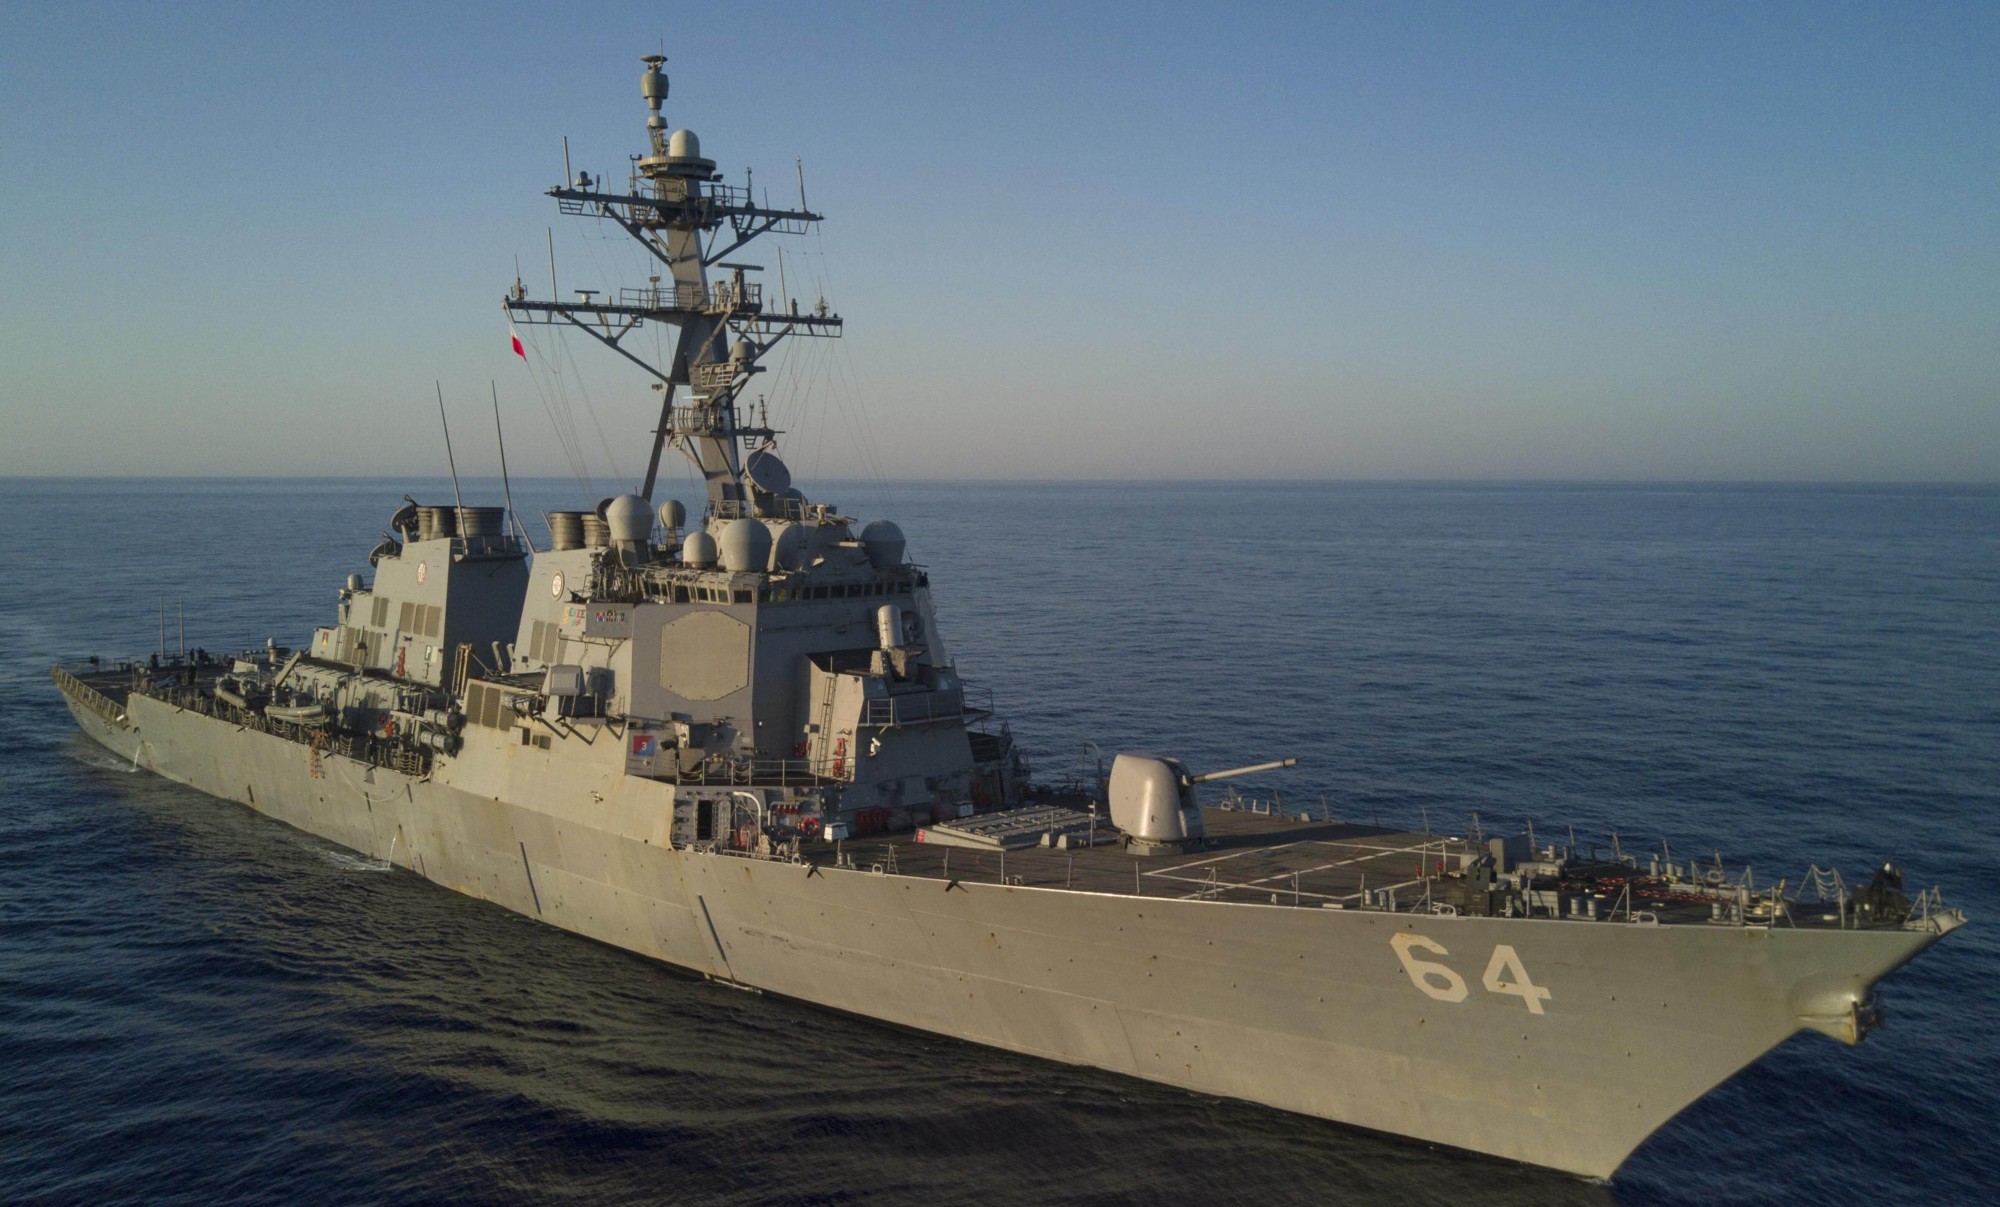 ddg-64 uss carney arleigh burke class guided missile destroyer aegis us navy 137